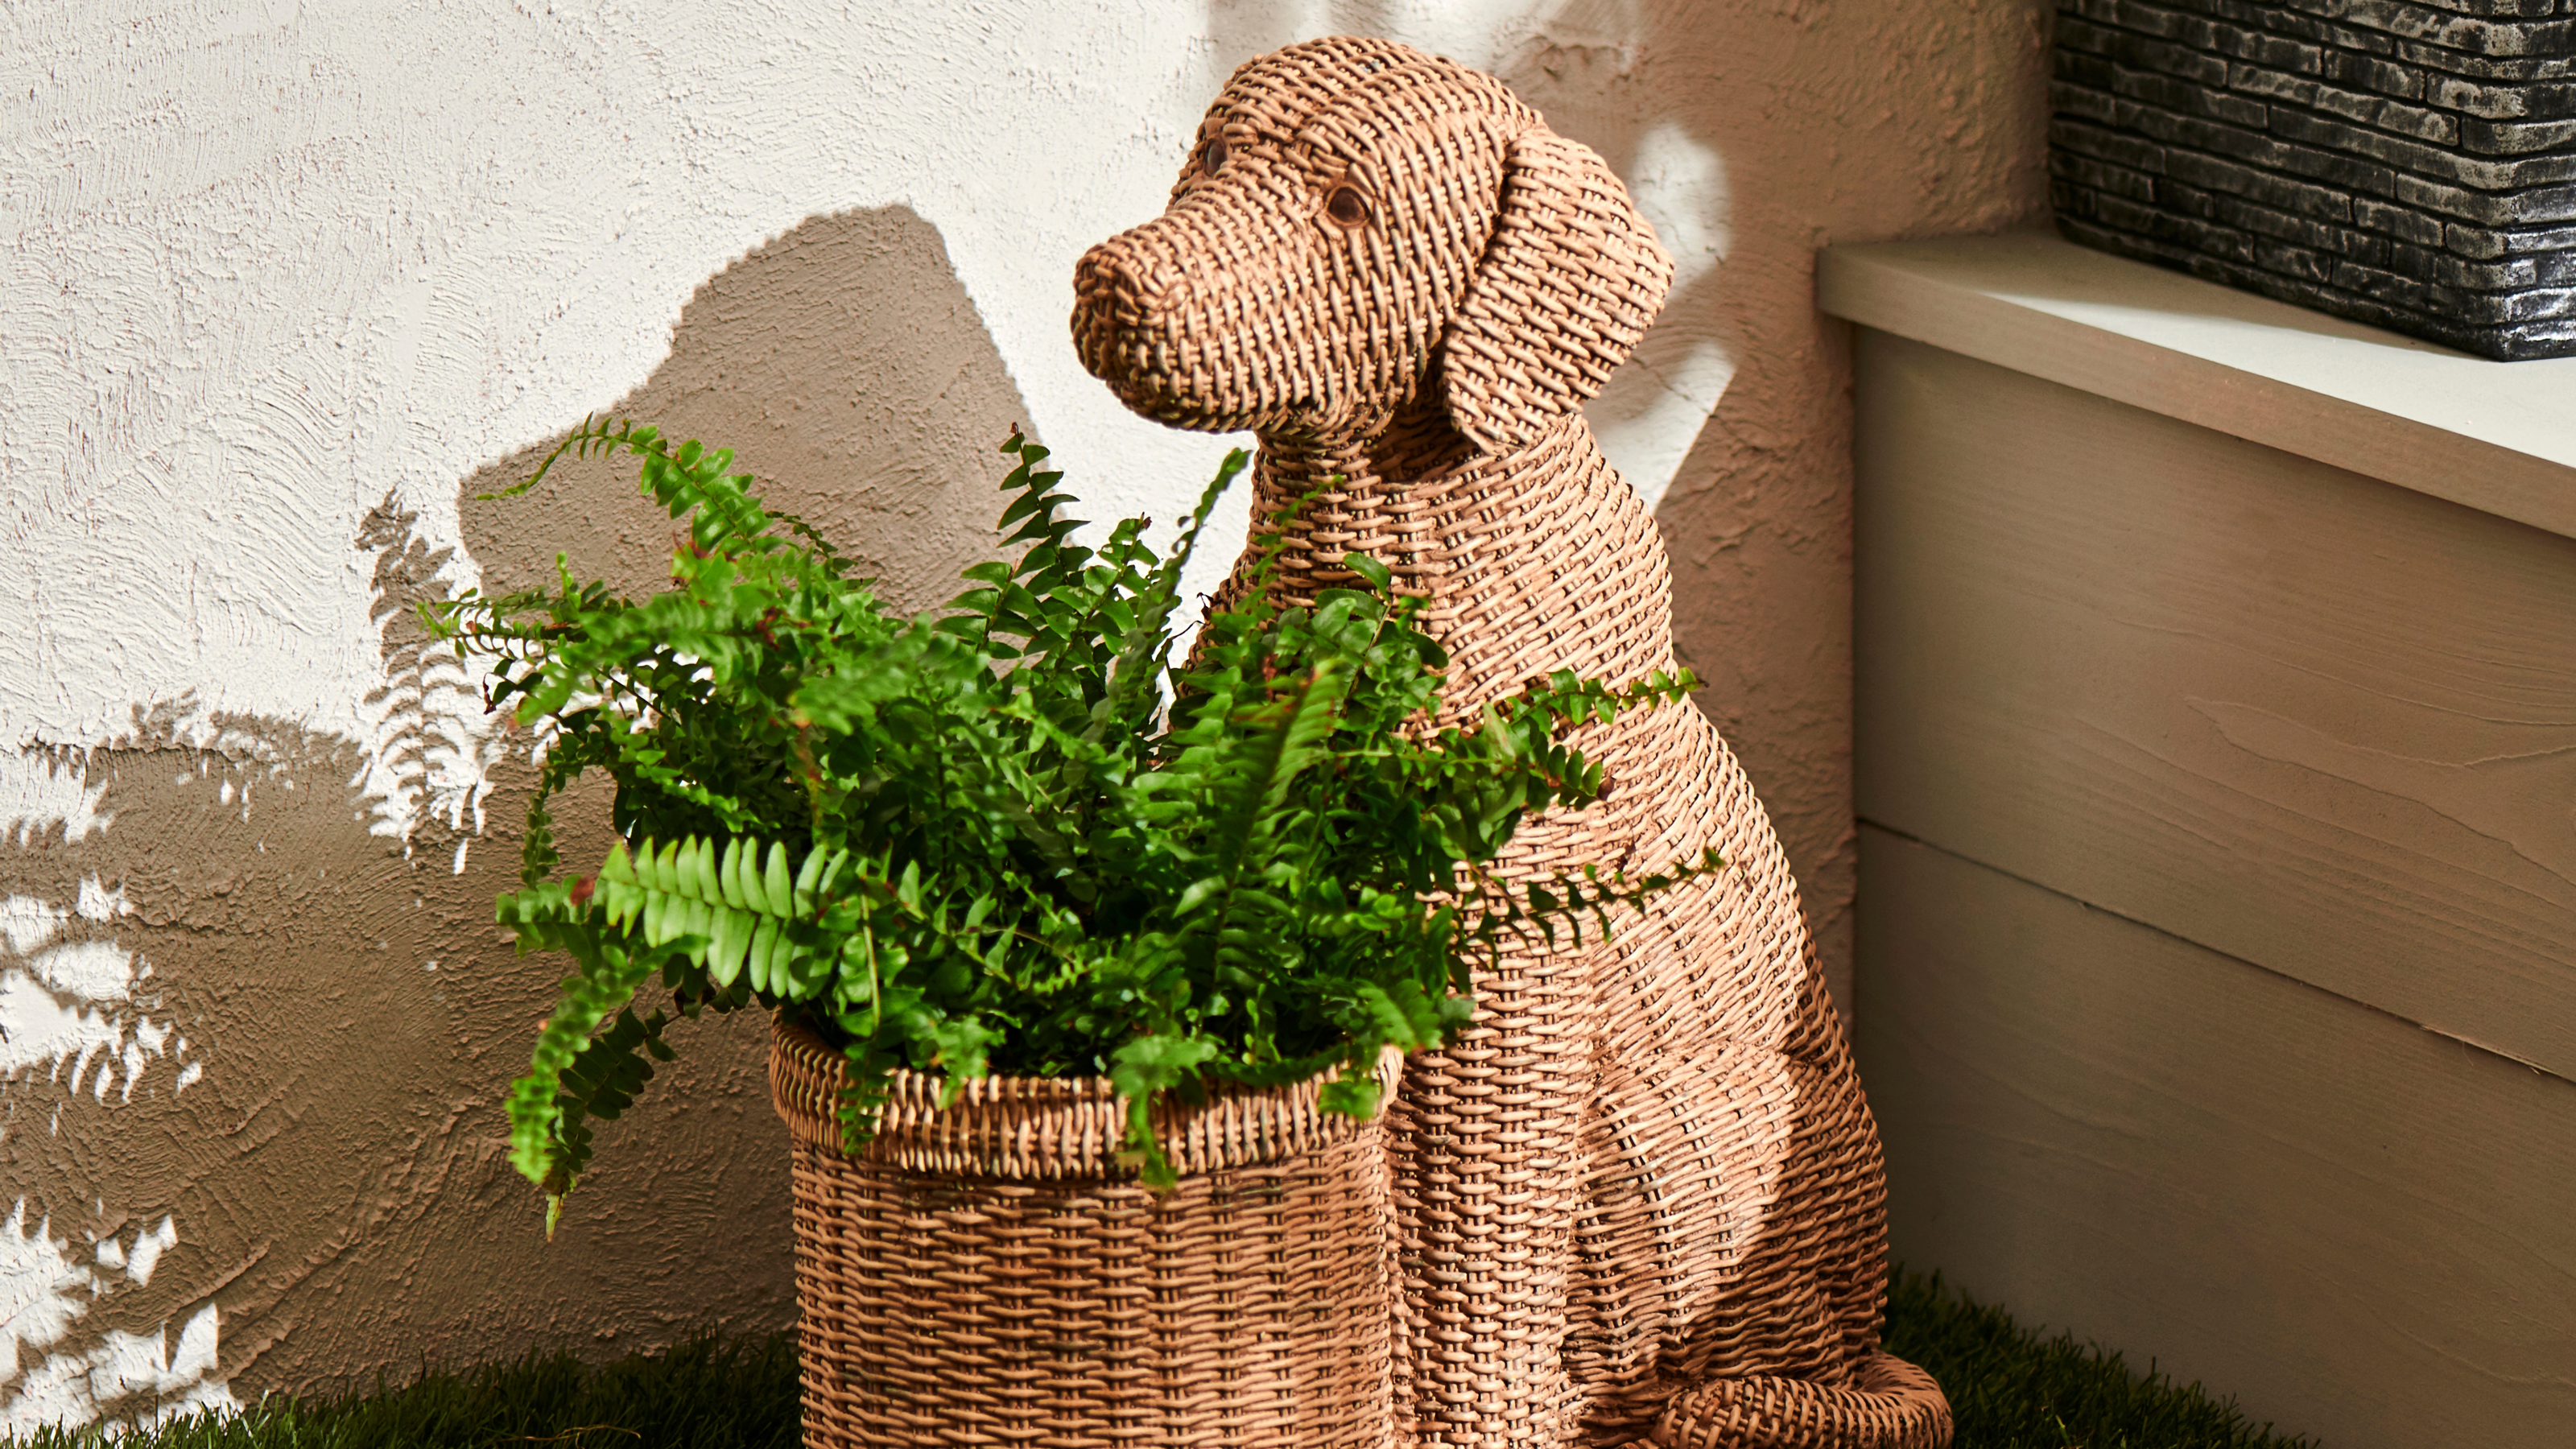 Animal planters are trending   how to style the new trend ...